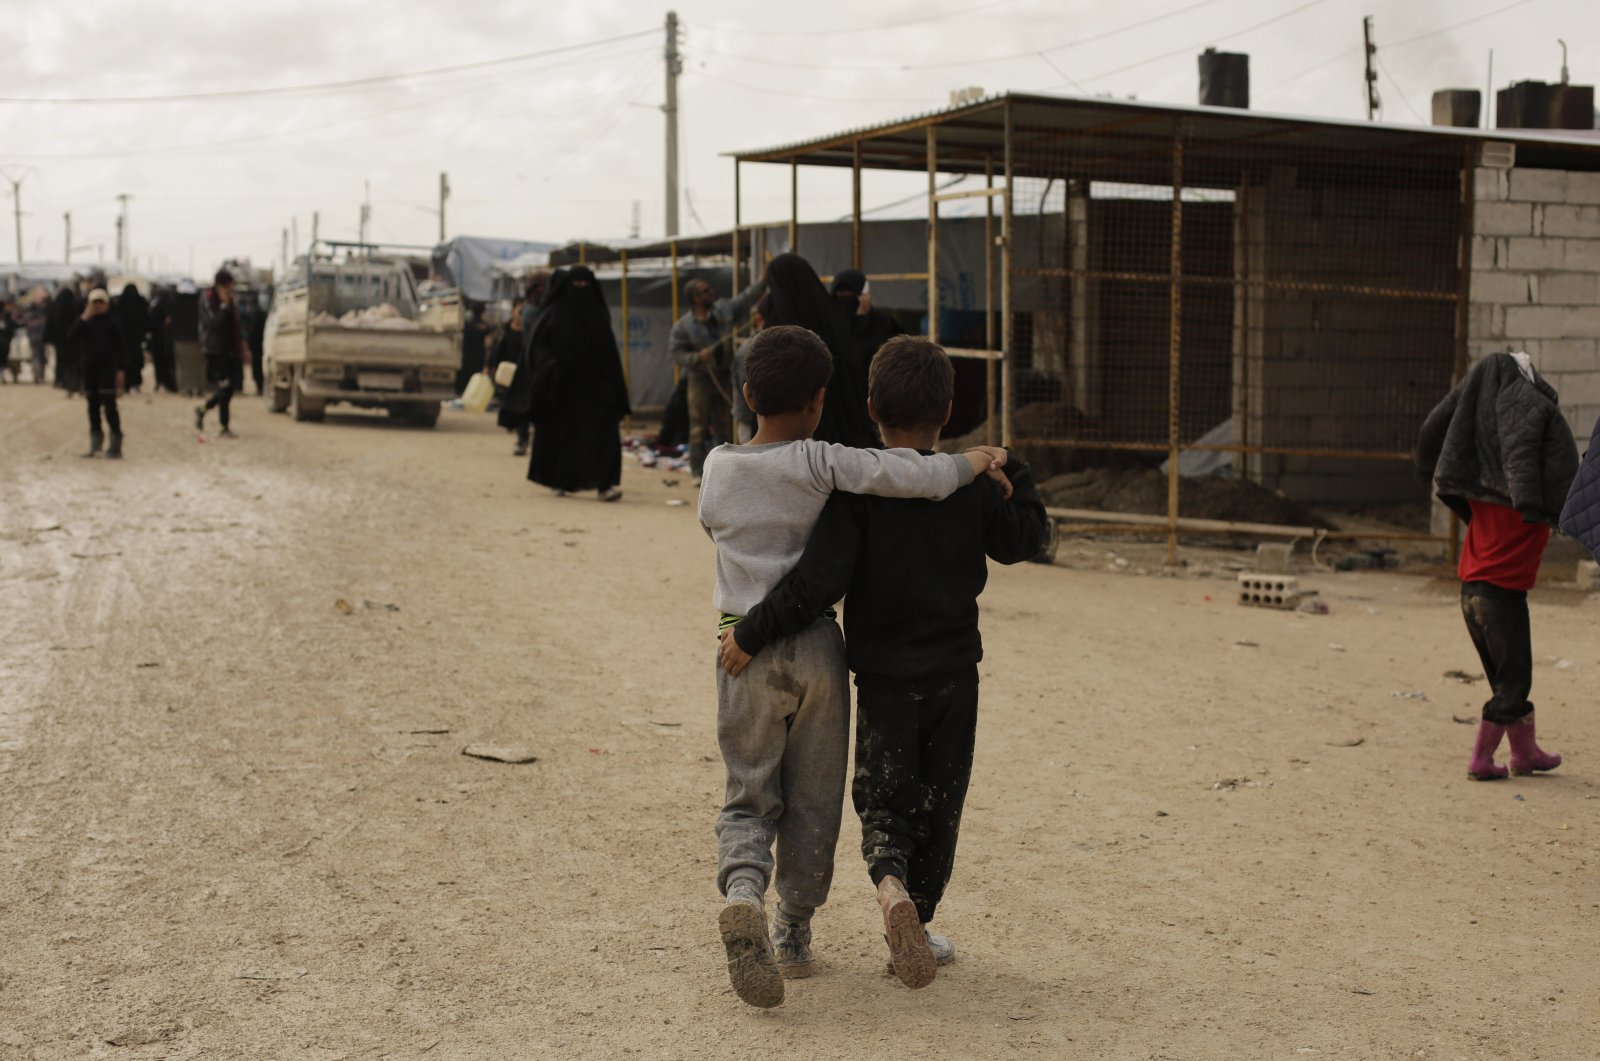 Boys walk together in the marketplace at Al-Hol camp, Hassakeh province, Syria, March 31, 2019. (AP File Photo)